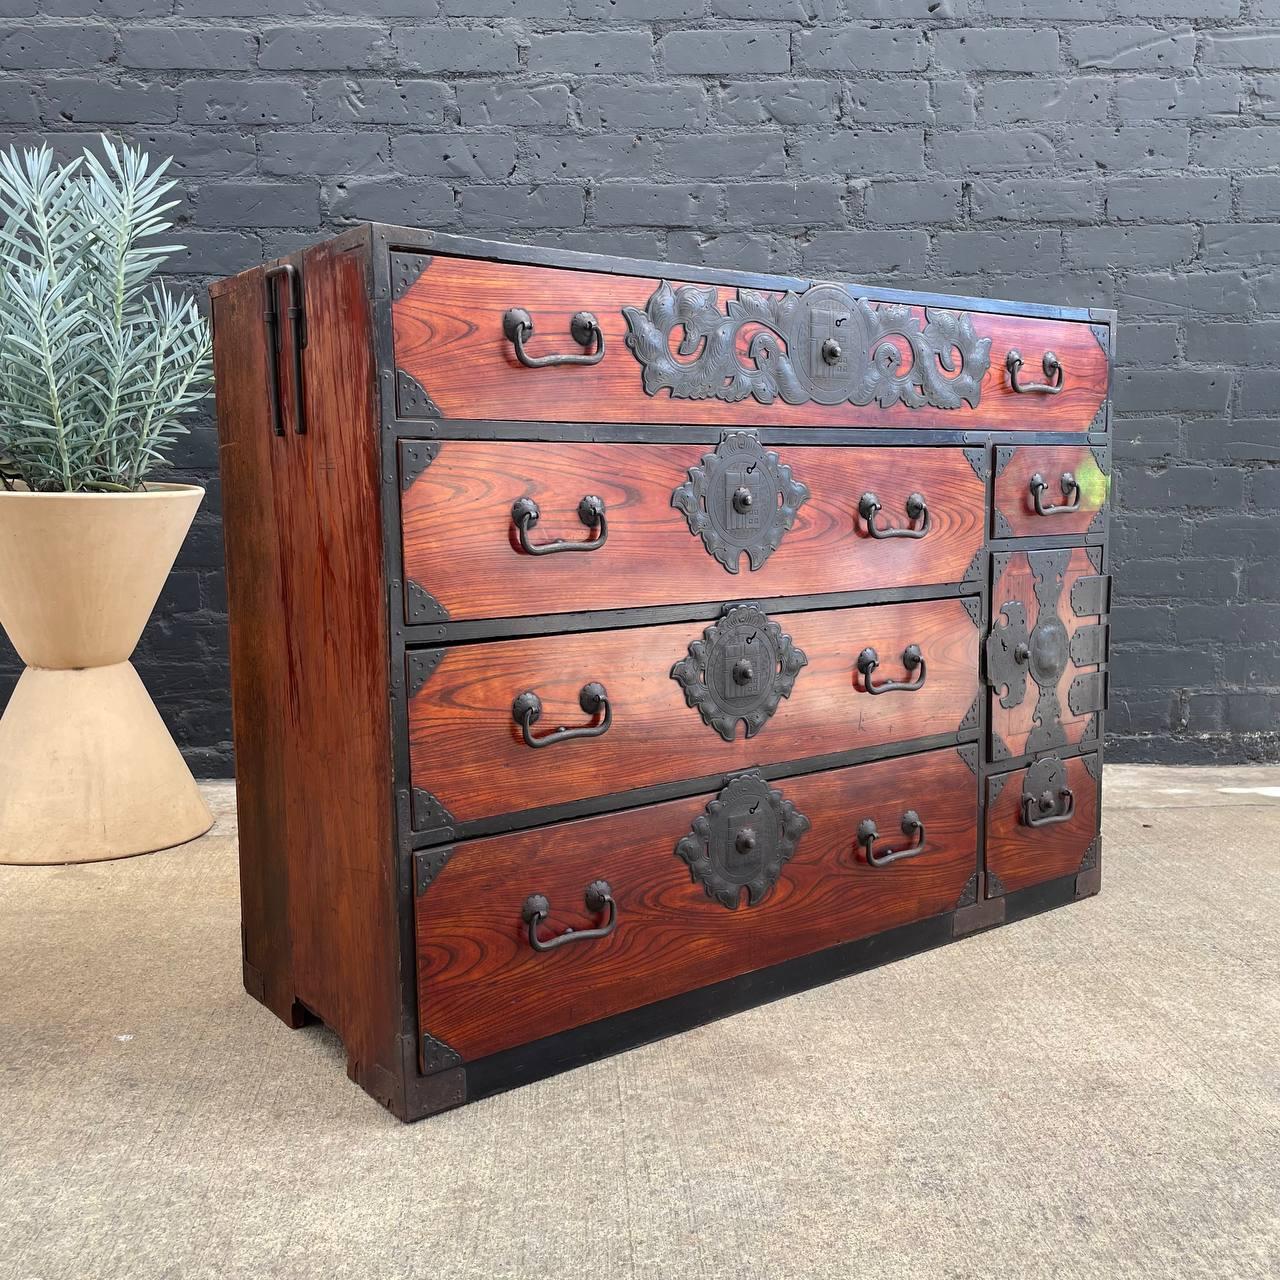 Antique Late 1800’s Japanese Cedar Tansu Chest of Drawers Dresser 

Country: Japan
Materials: Wood, Iron
Condition: Original Condition
Style: Japanese Antique 
Year: 1890’s

$2,250

Dimensions:
35”H x 47”W x 17.50”D